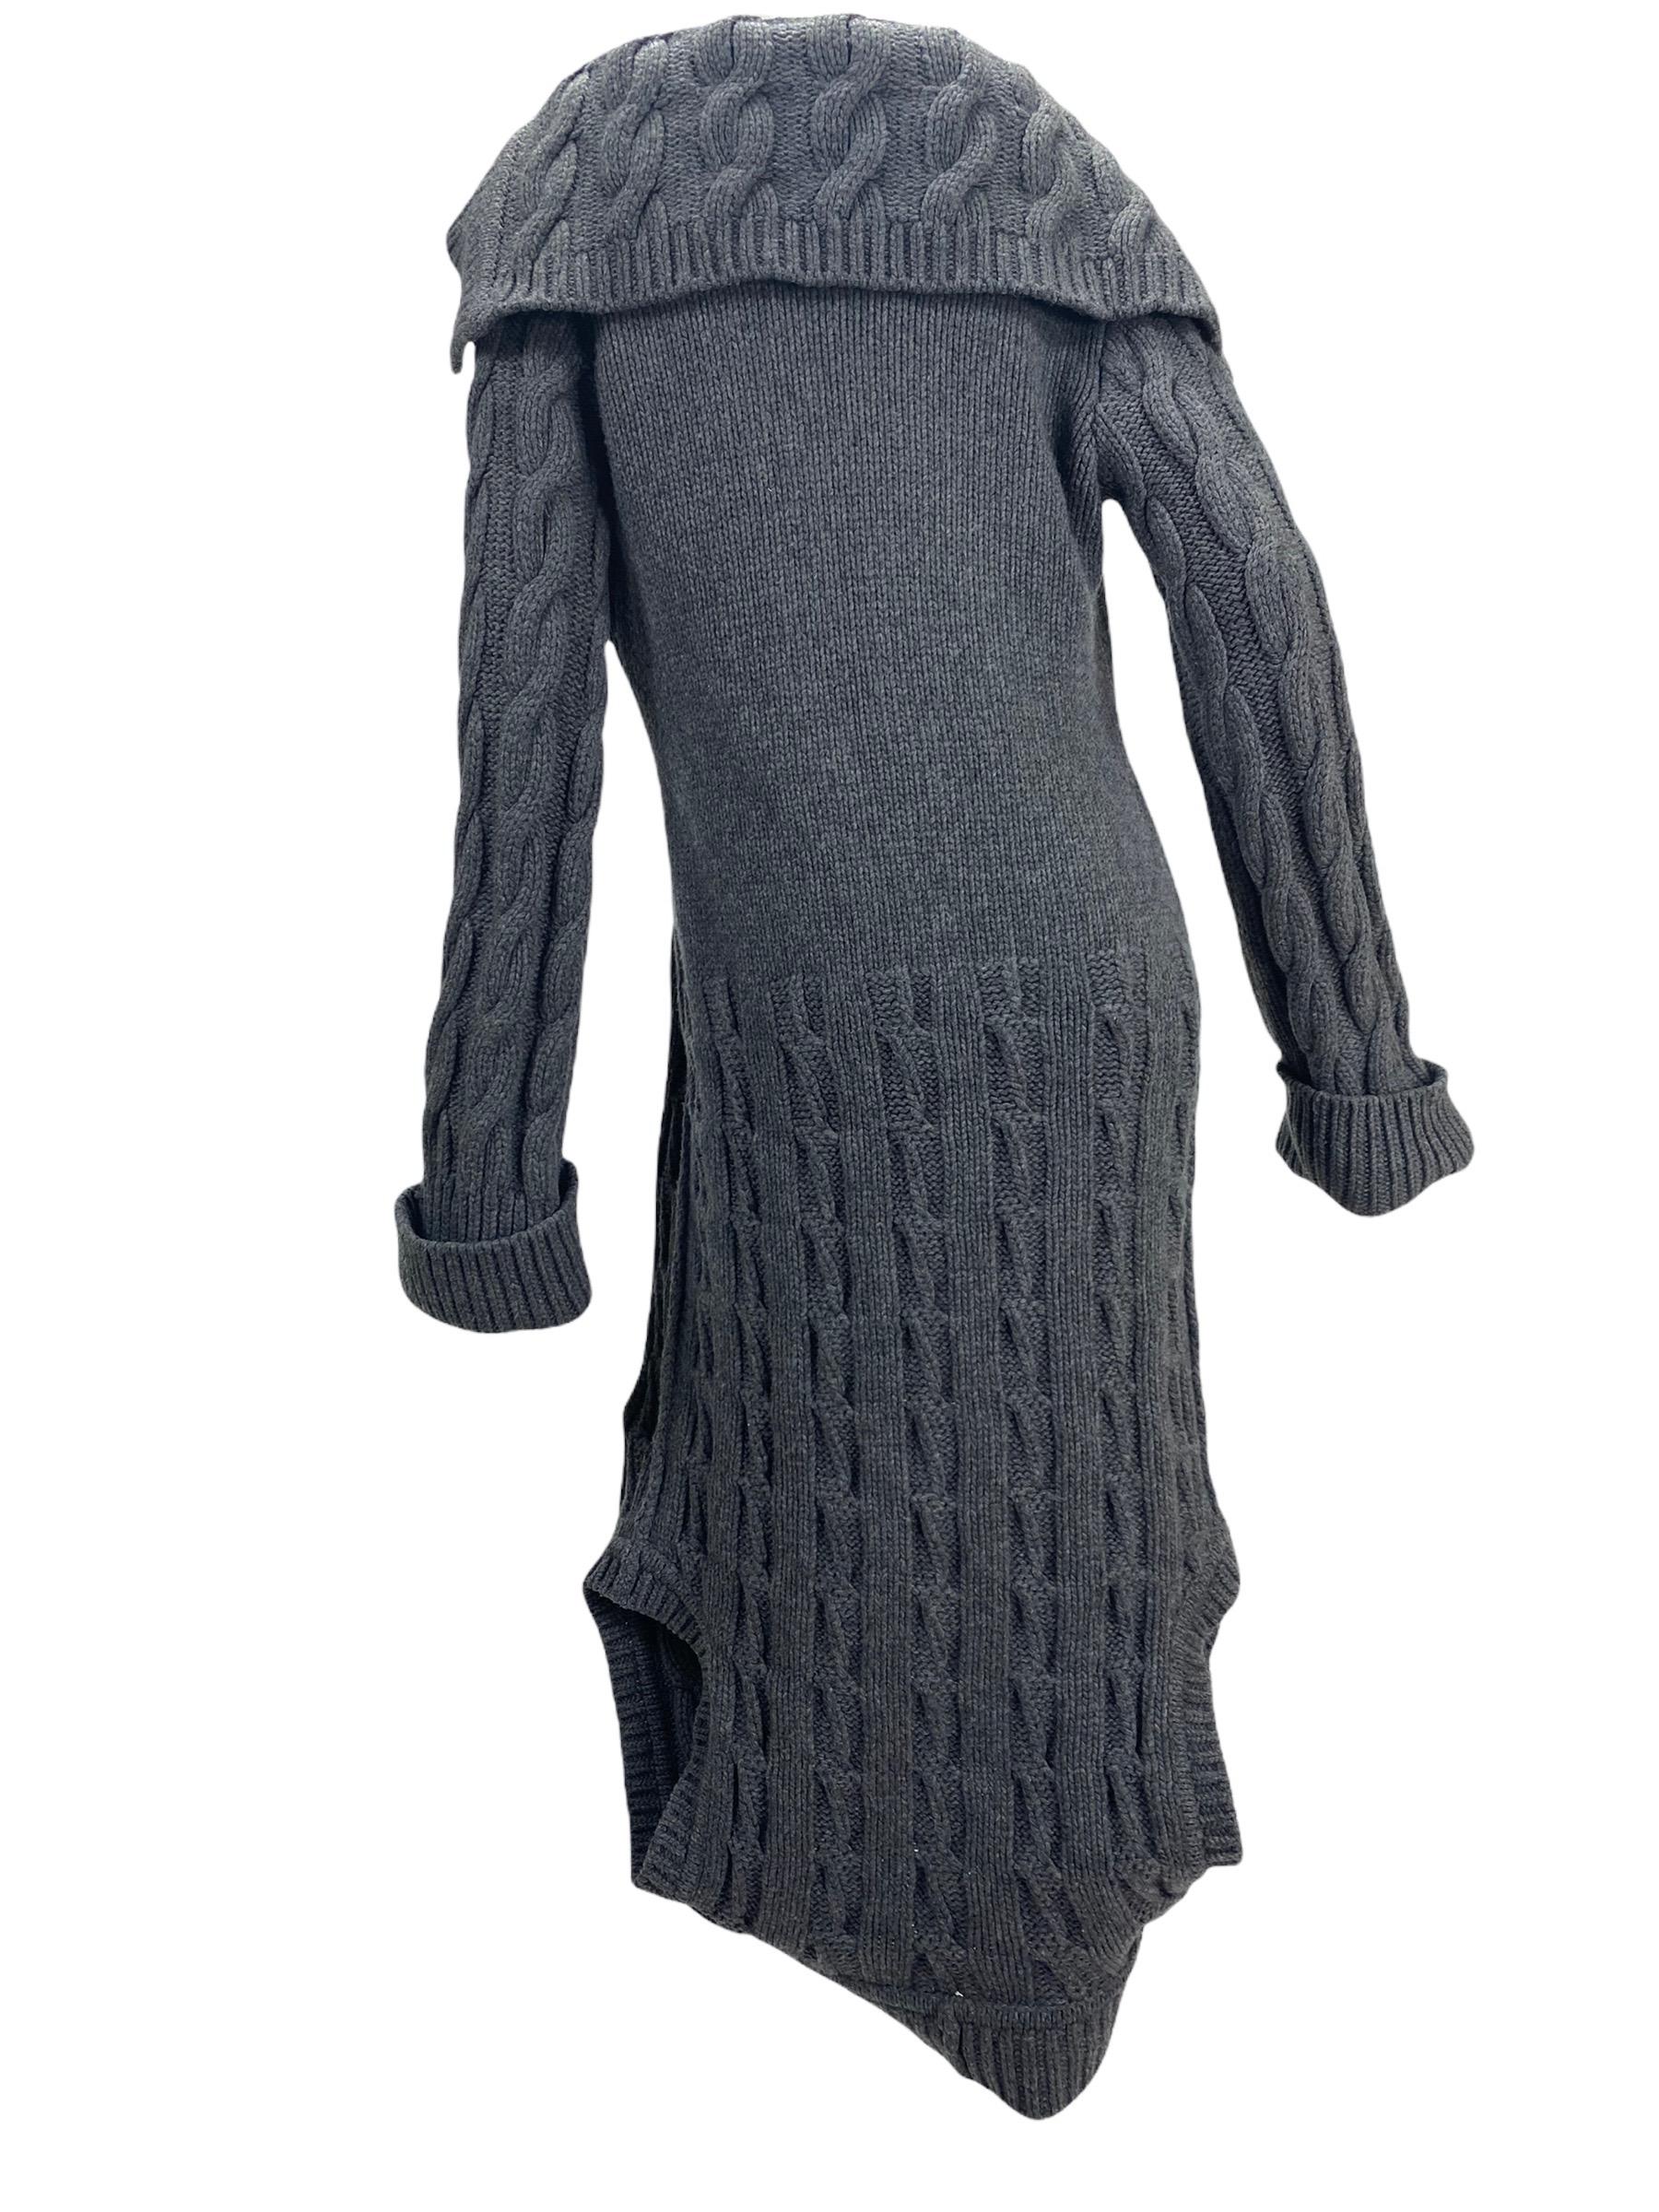 A/W 2006 ALEXANDER McQUEEN The Widows of Culloden Knit Convertible Cardigan Coat For Sale 4